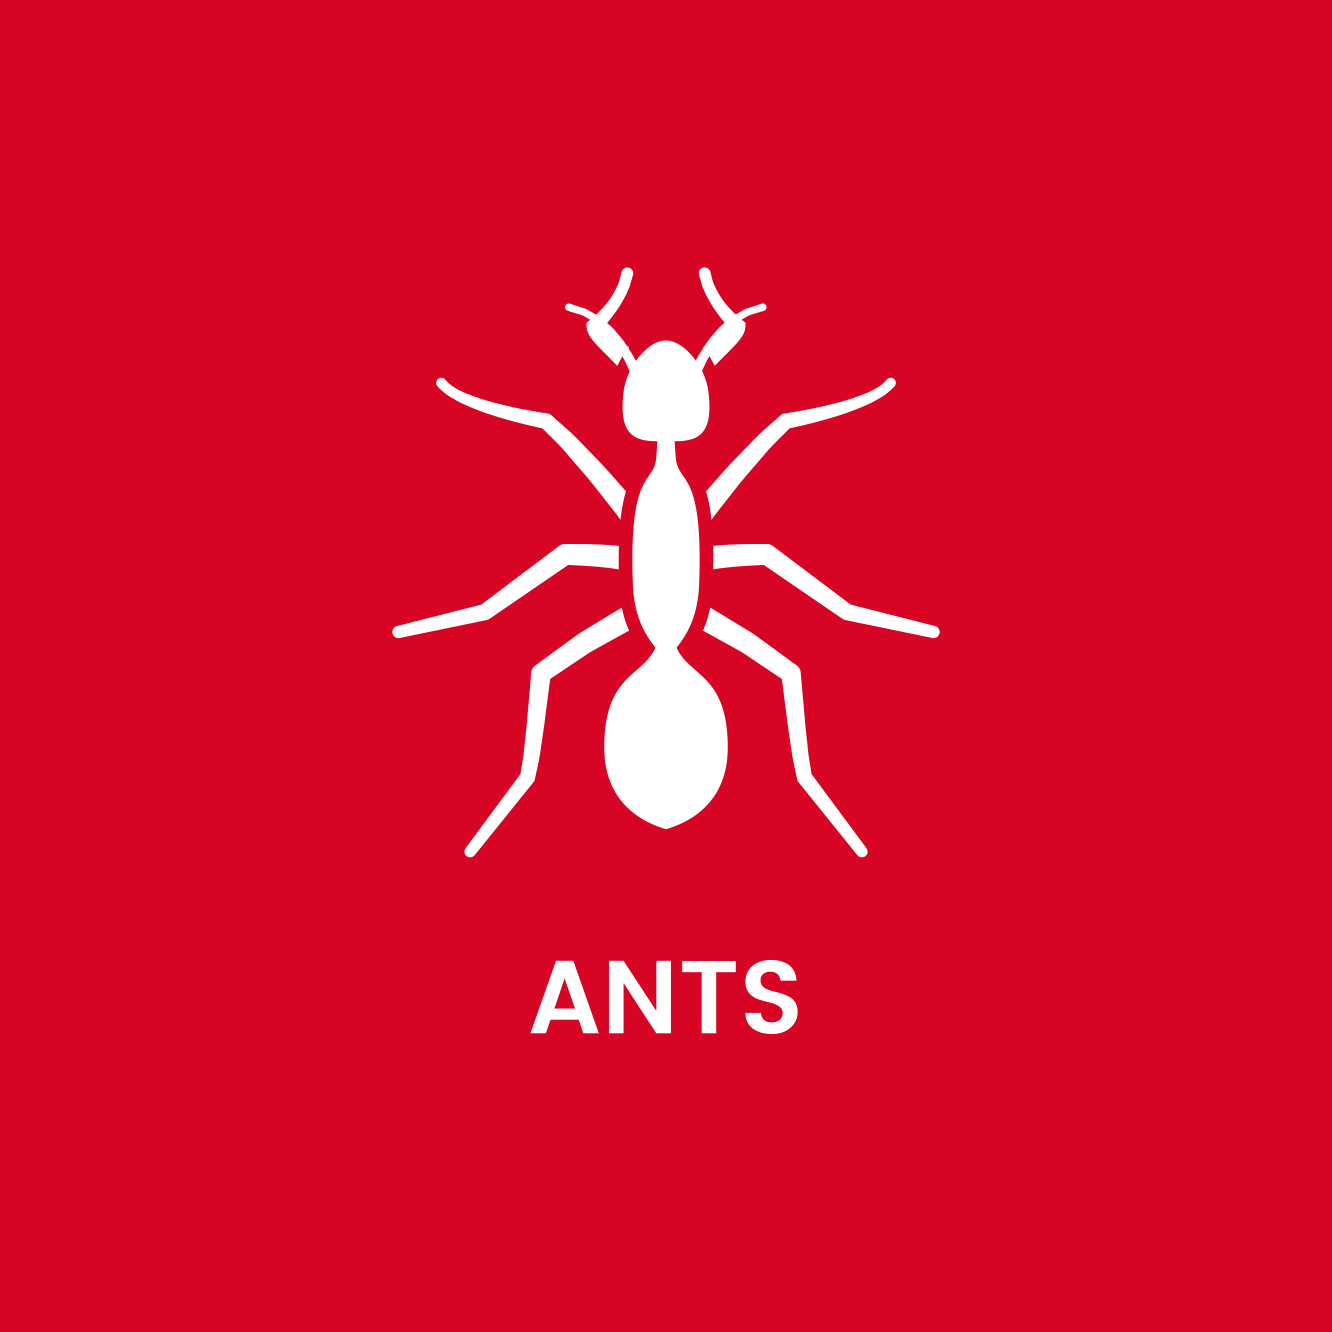 A white ant icon on a red background with the word ants below it.